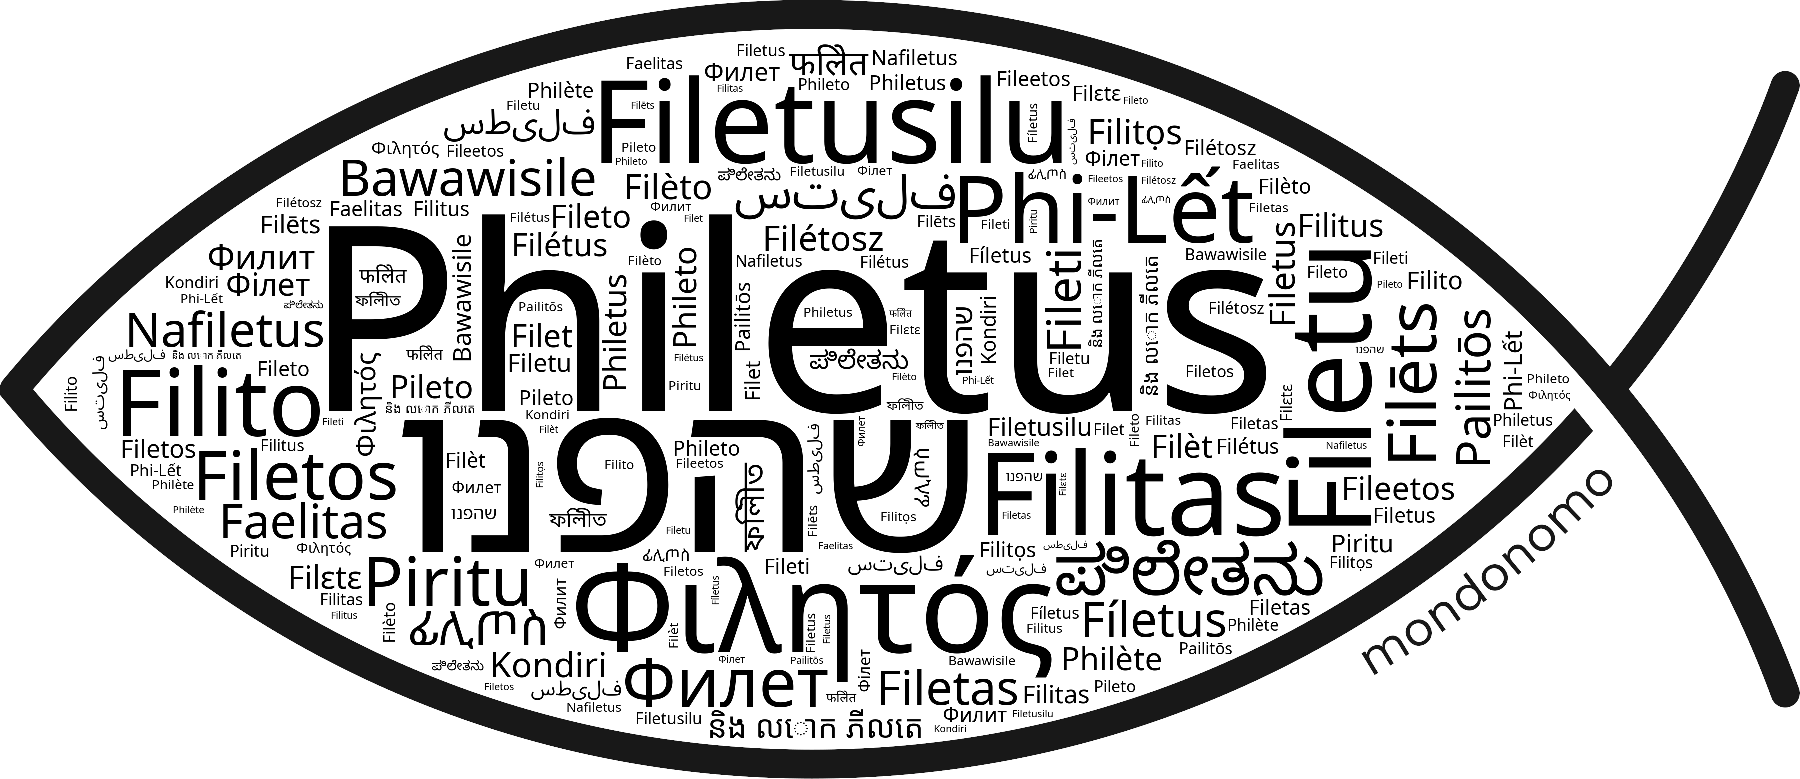 Name Philetus in the world's Bibles